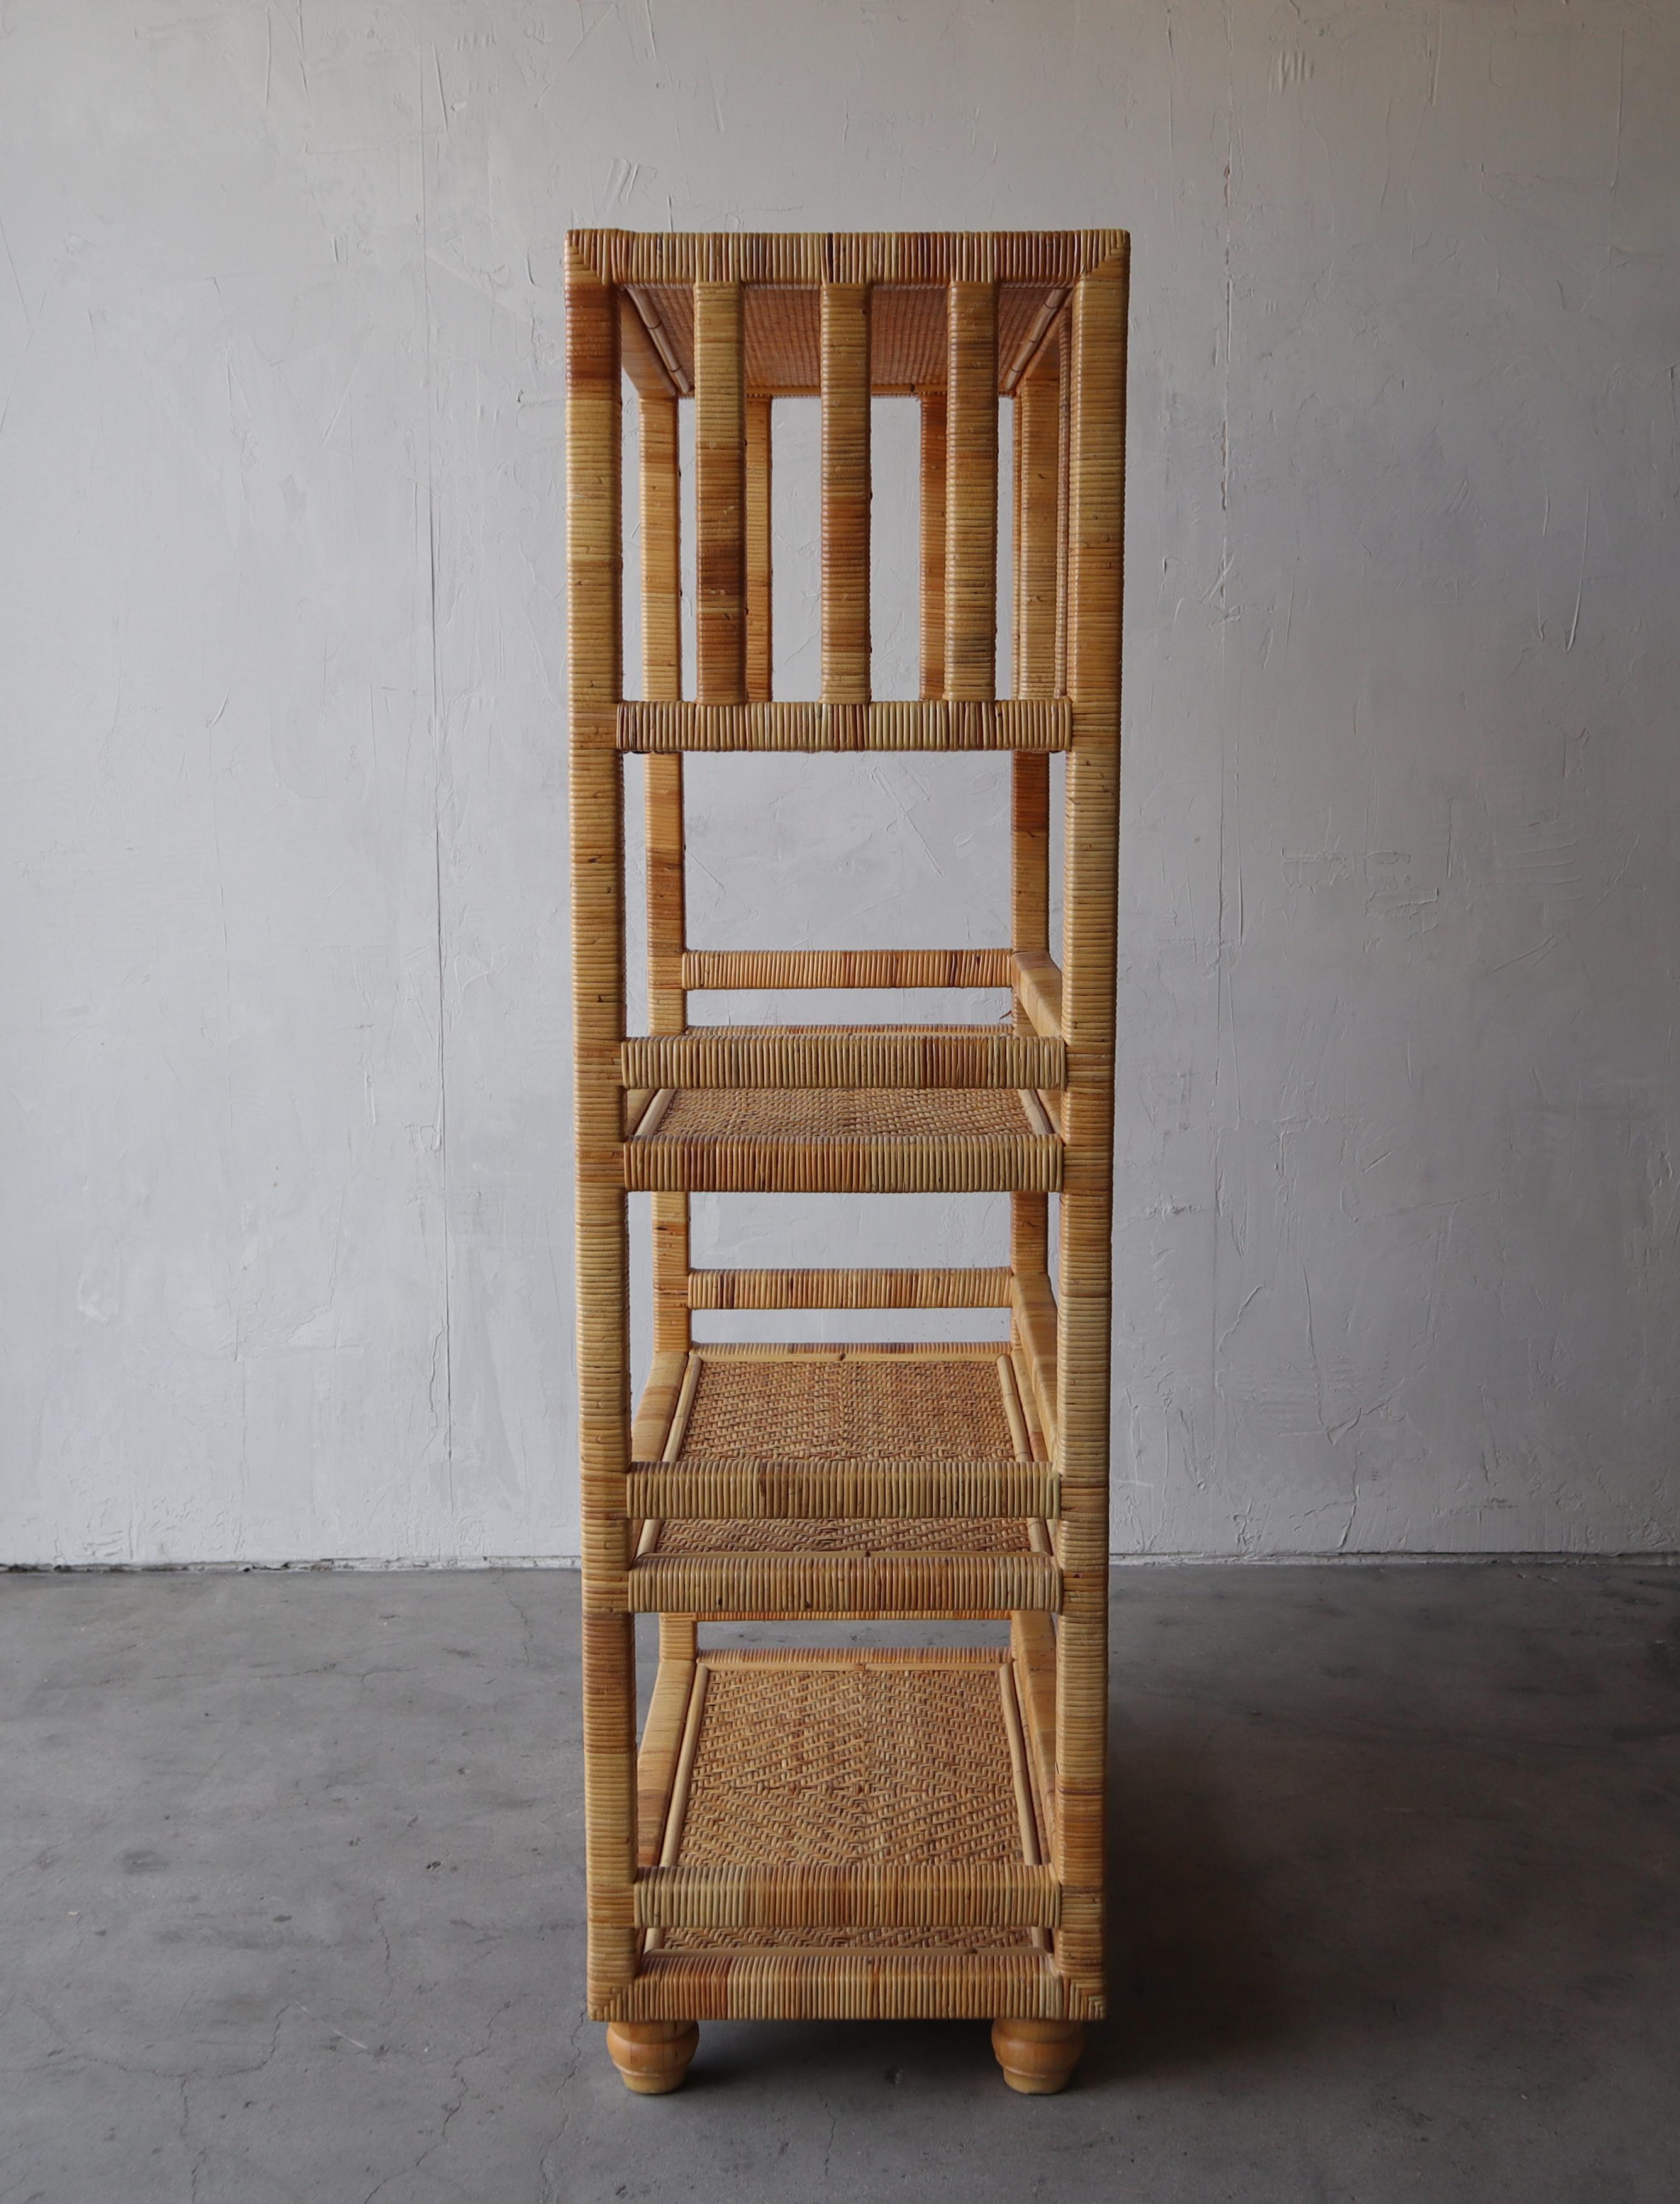 High Quality Vintage Wicker Bookshelf In Good Condition For Sale In Las Vegas, NV